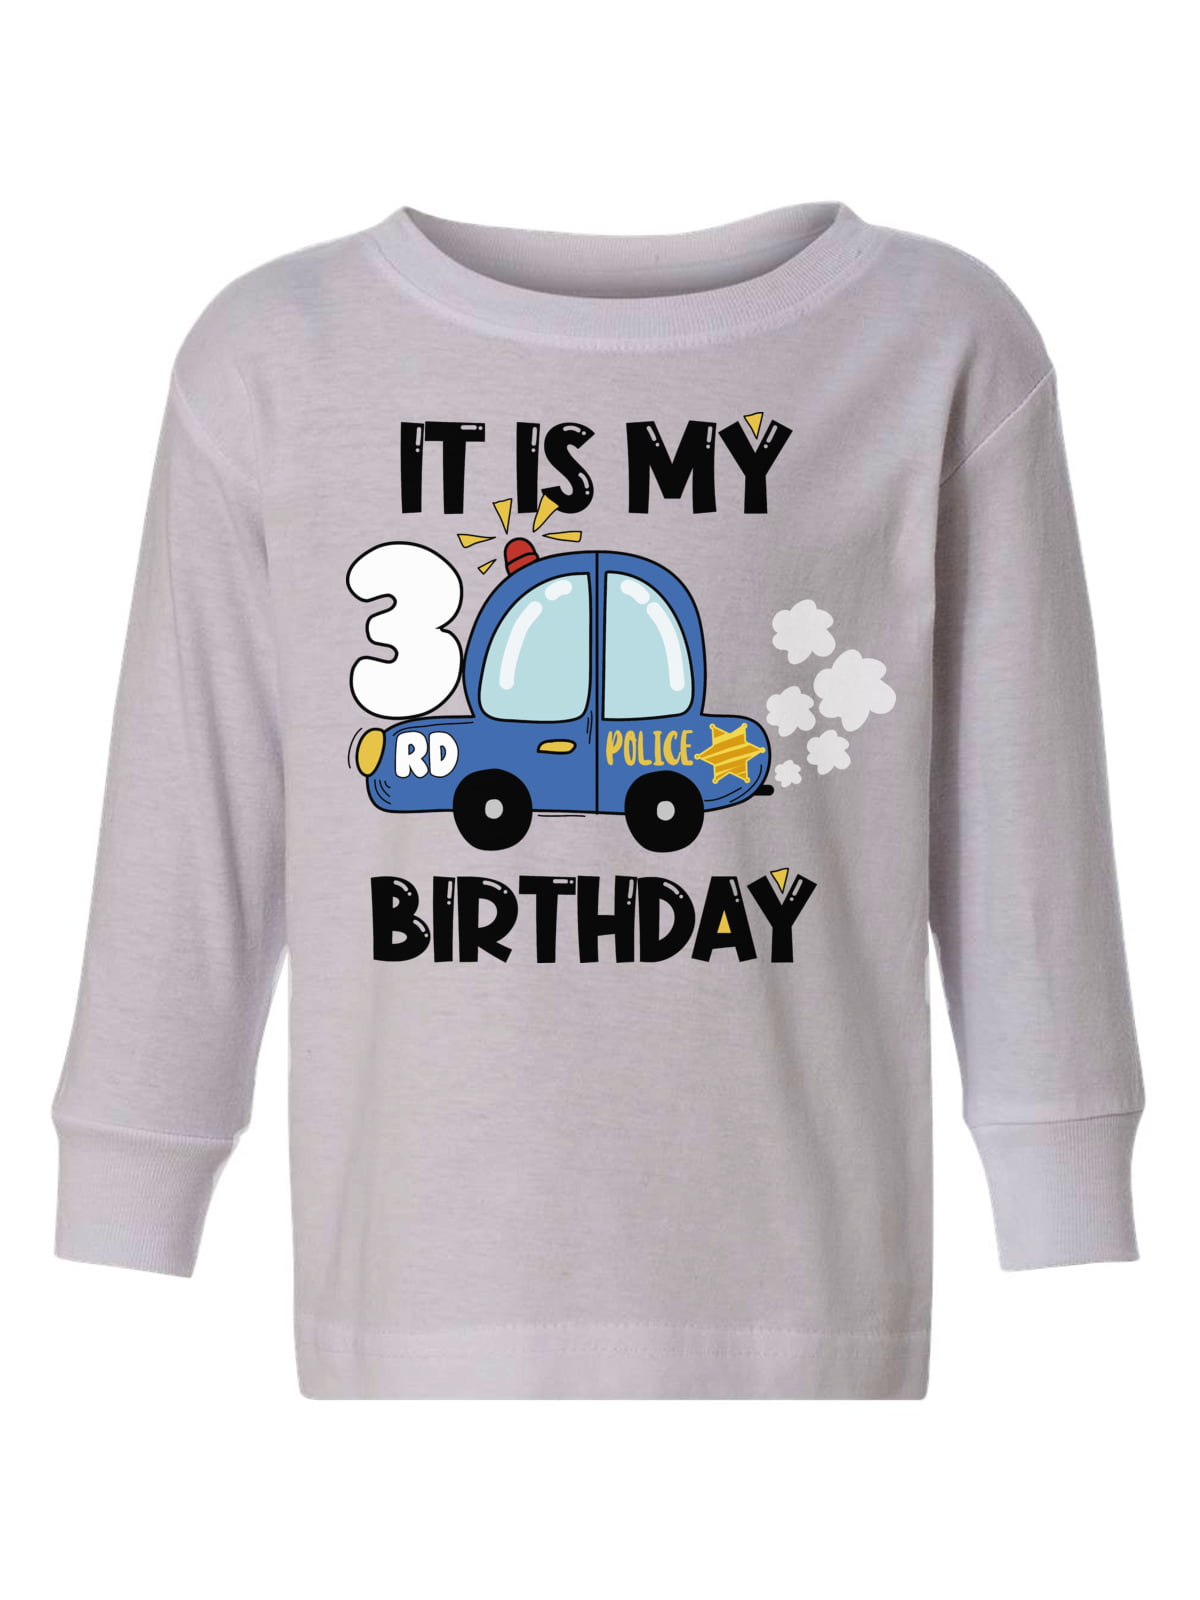 Firefighter and Police Pup Birthday Shirt